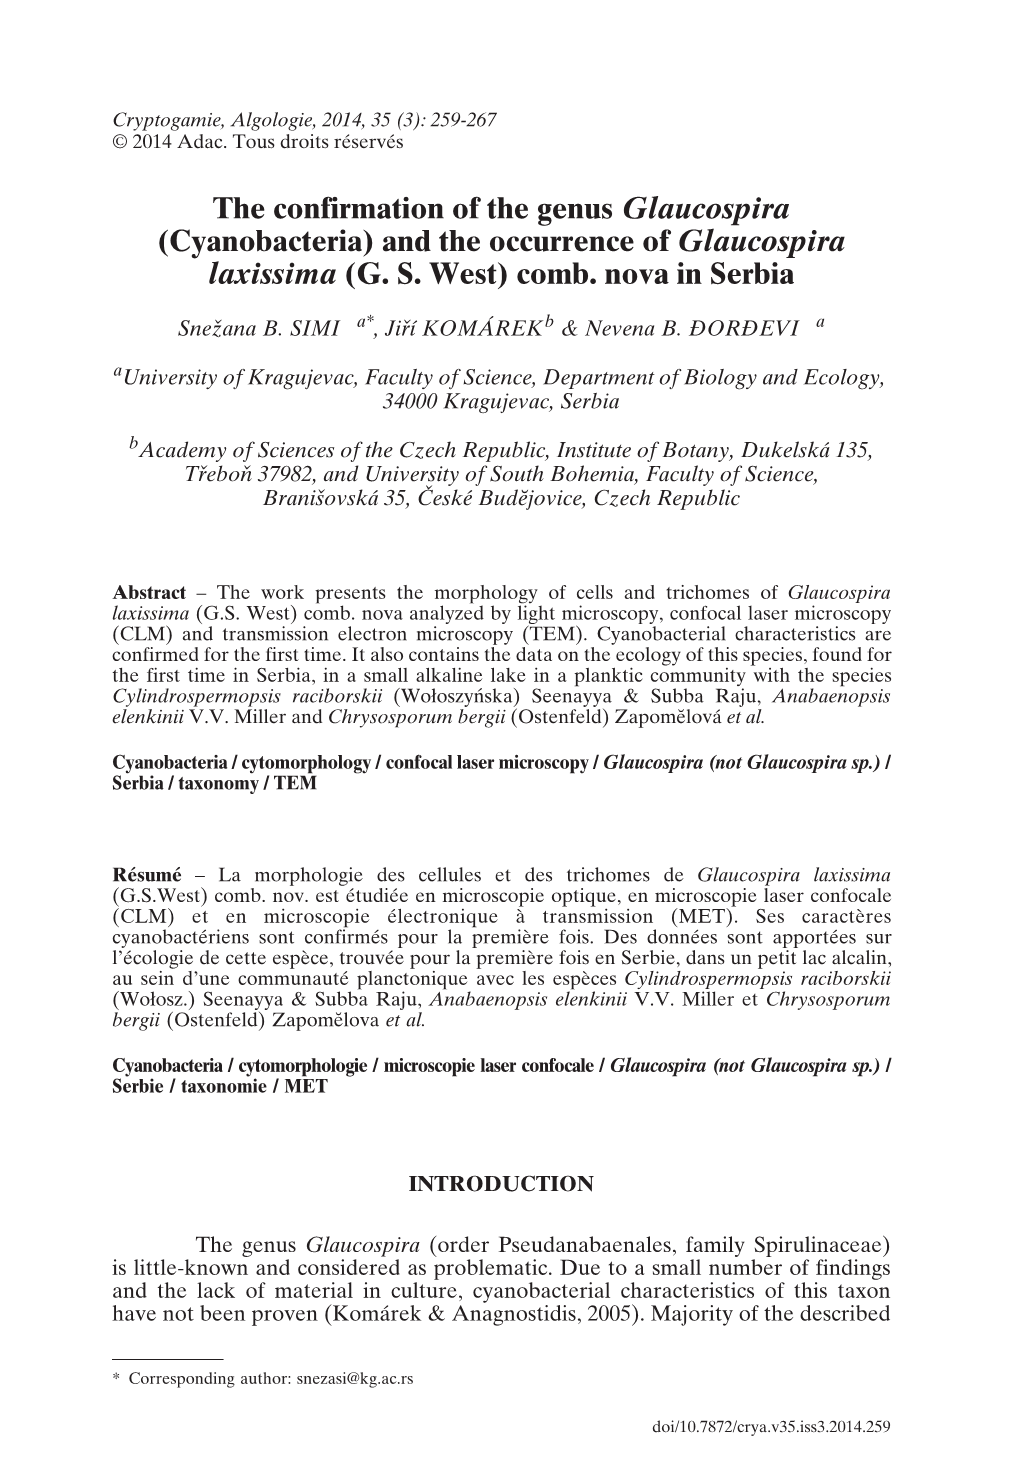 Cyanobacteria) and the Occurrence of Glaucospira Laxissima (GS West